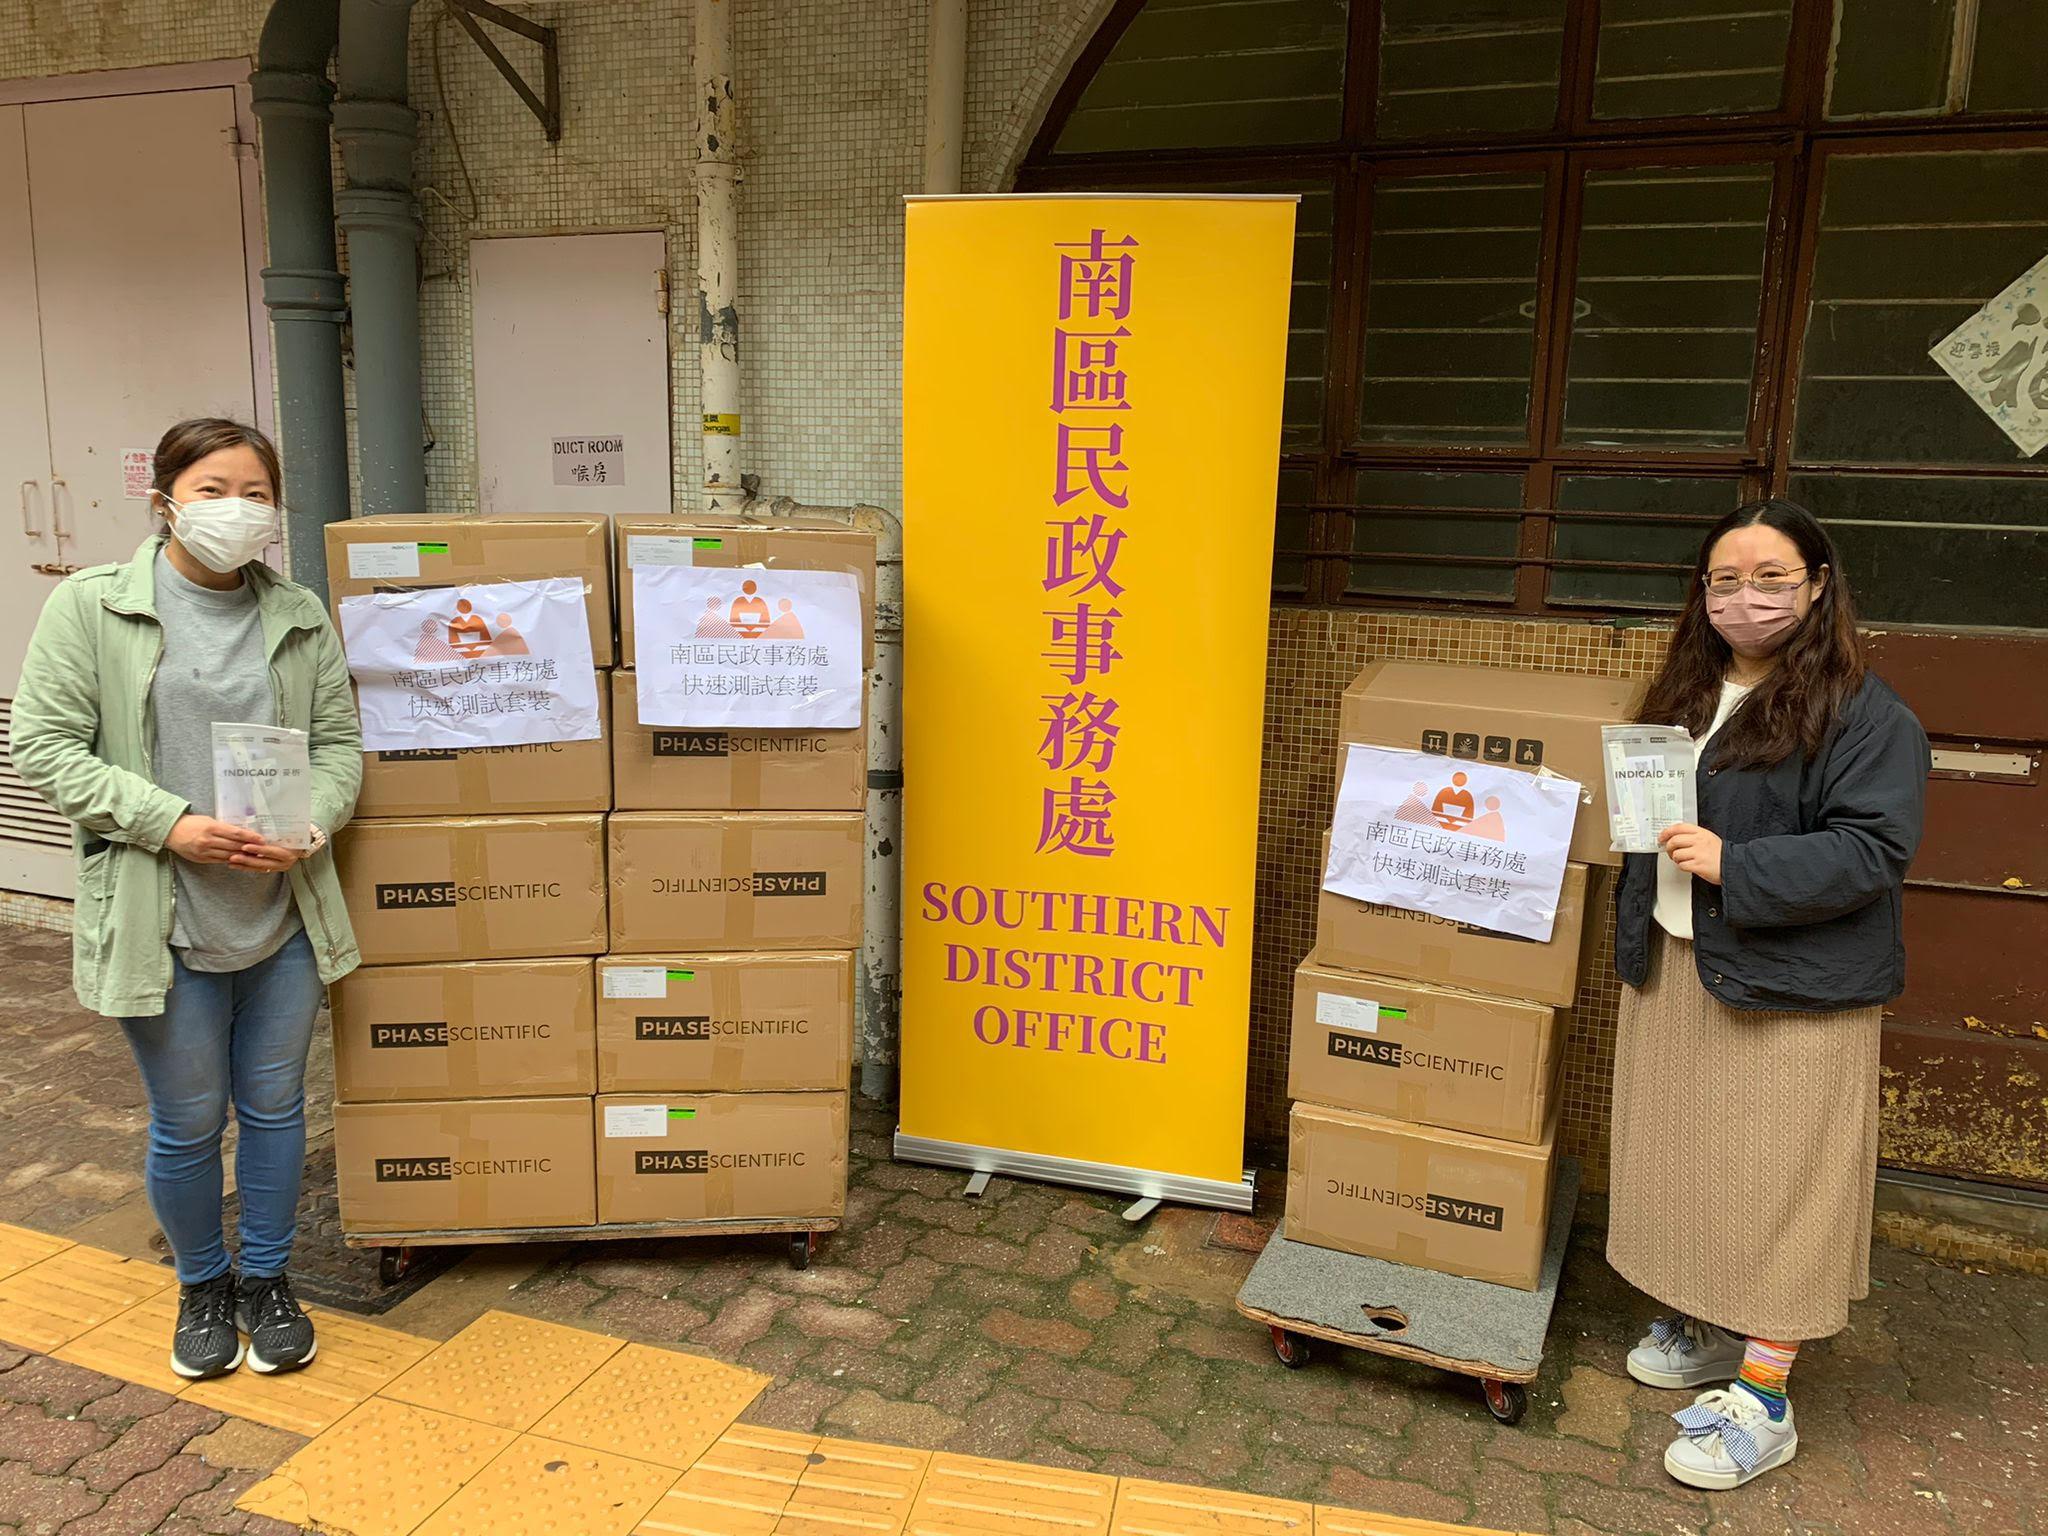 The Southern District Office distributed COVID-19 rapid test kits to households, cleansing workers and property management staff living and working in Lei Tung Estate for voluntary testing through the property management company.